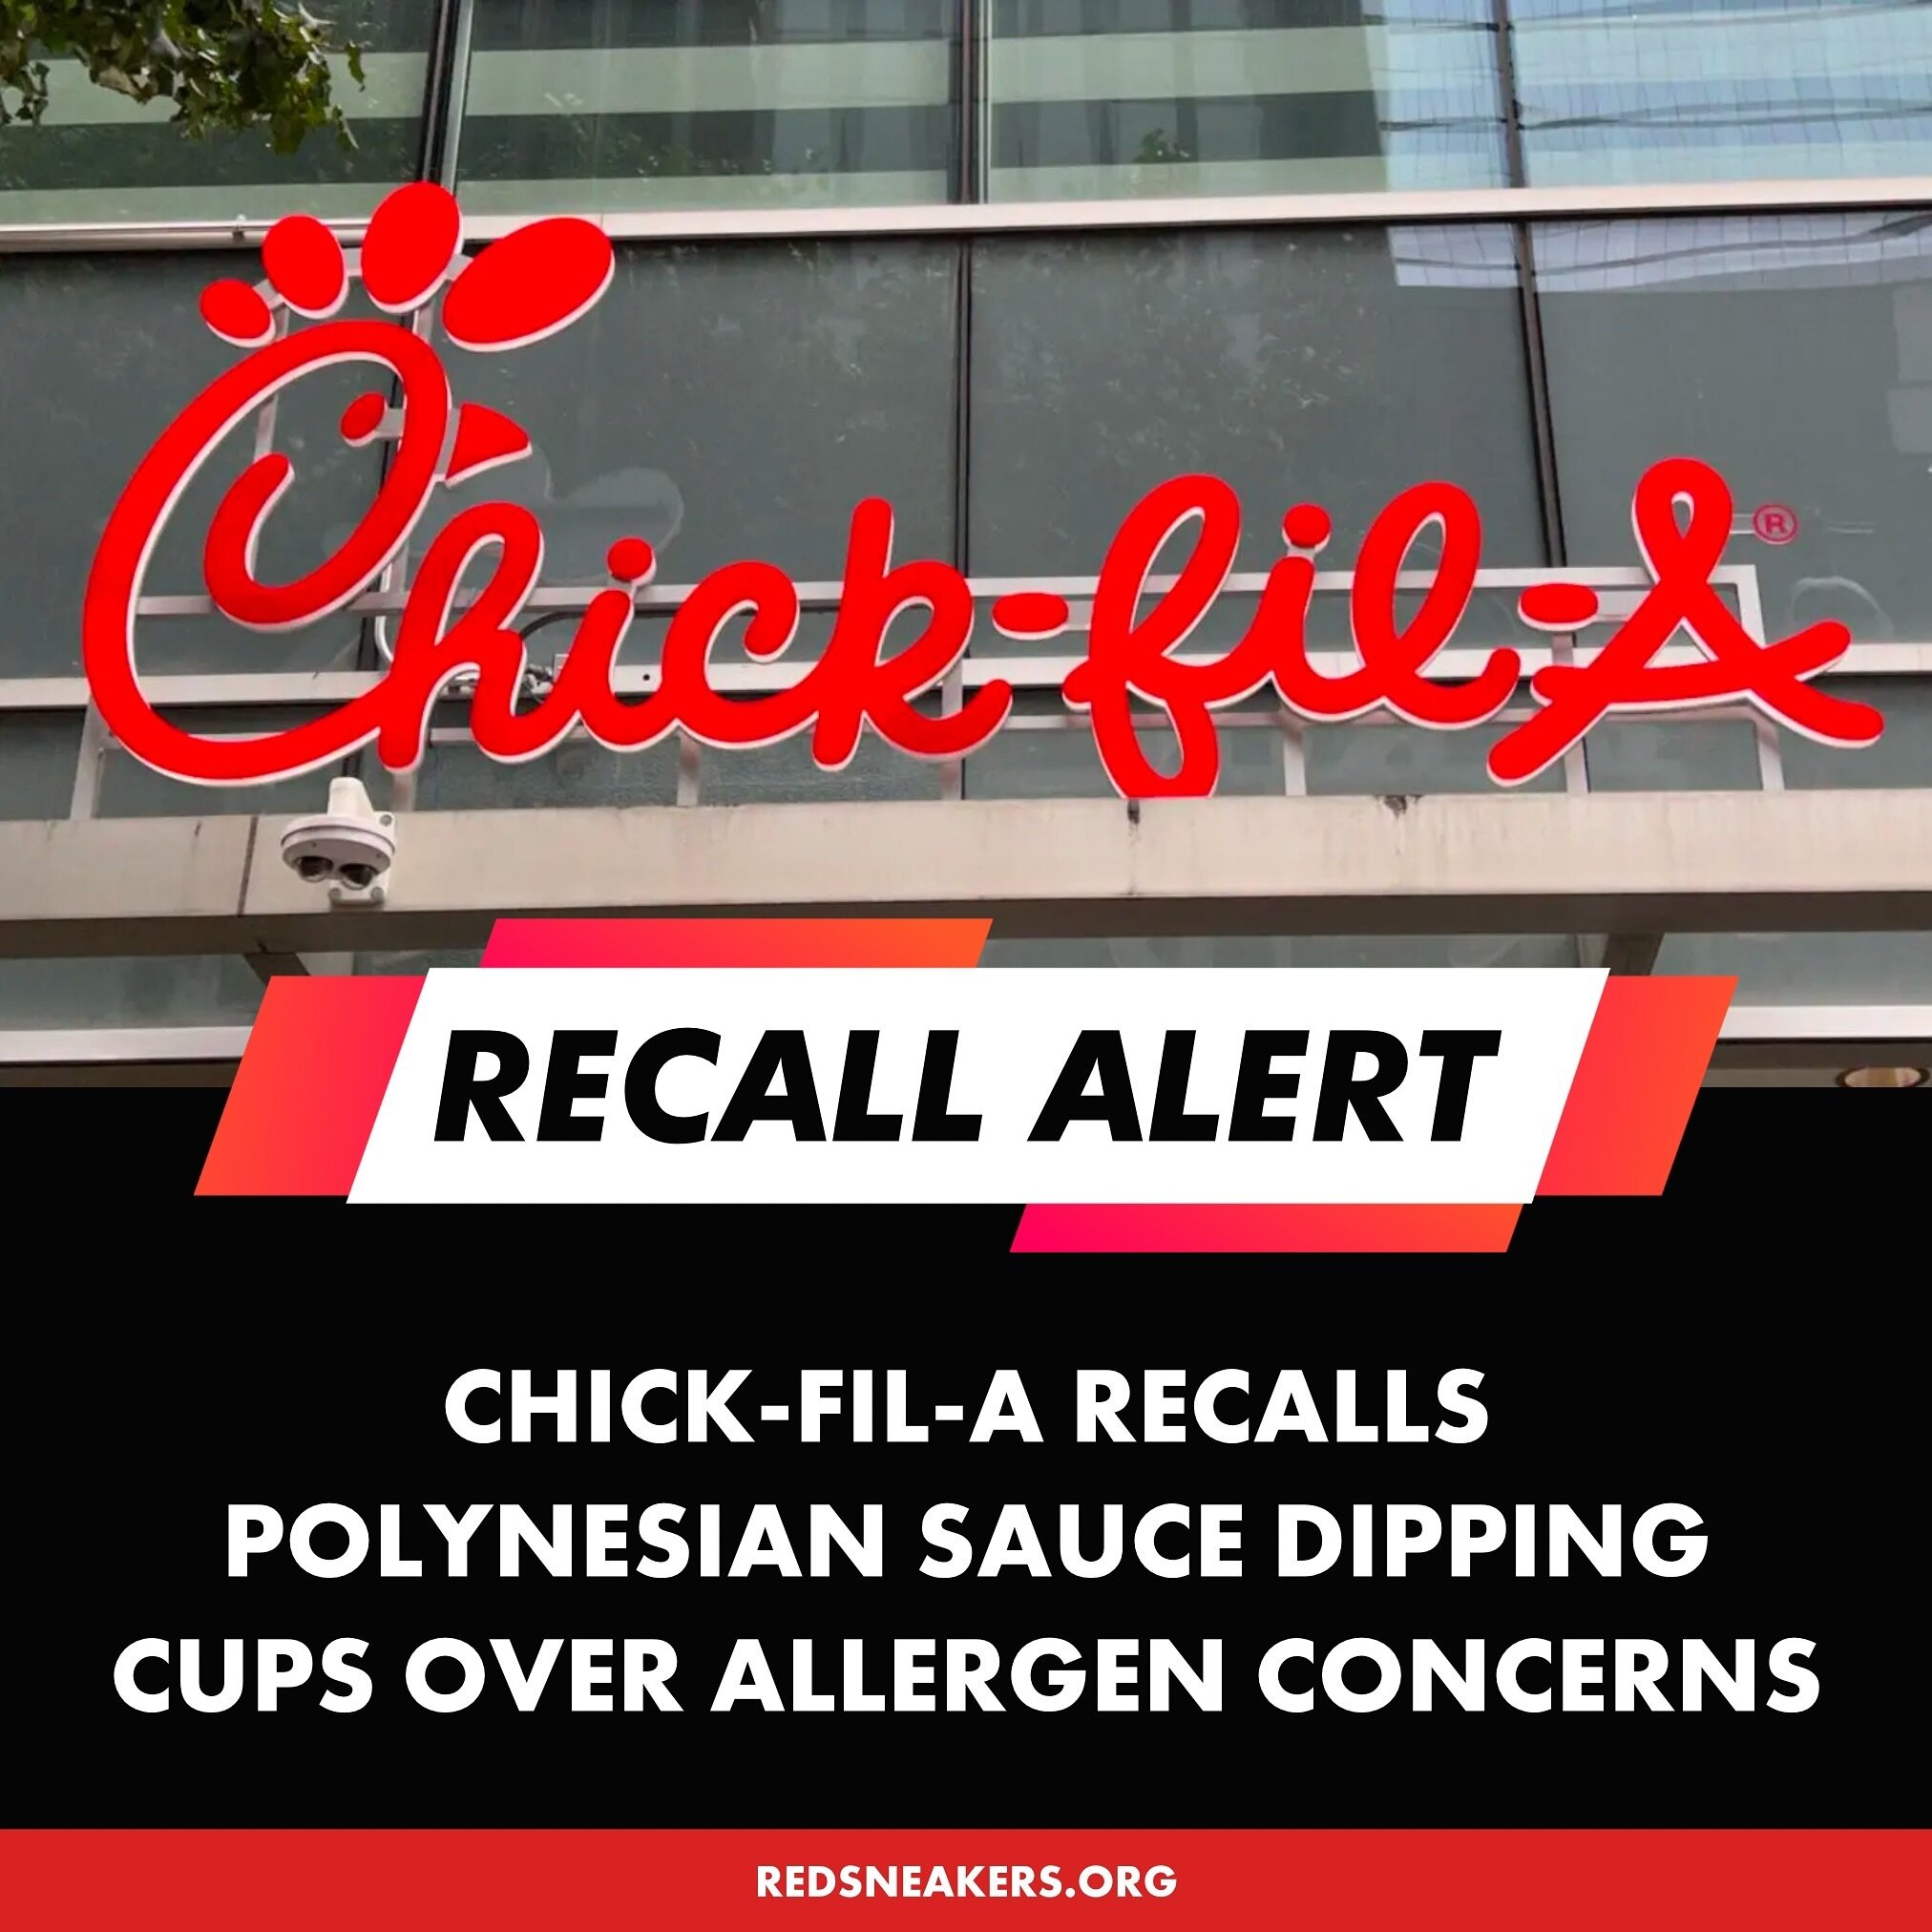 🚨 Chick-fil-A issued an important message to customers regarding a product recall. Here&rsquo;s what you need to know.

On February 29, Chick-Fil-A alerted its patrons to dispose of any Polynesian Sauce dipping cups. 

The Polynesian Sauce was incor